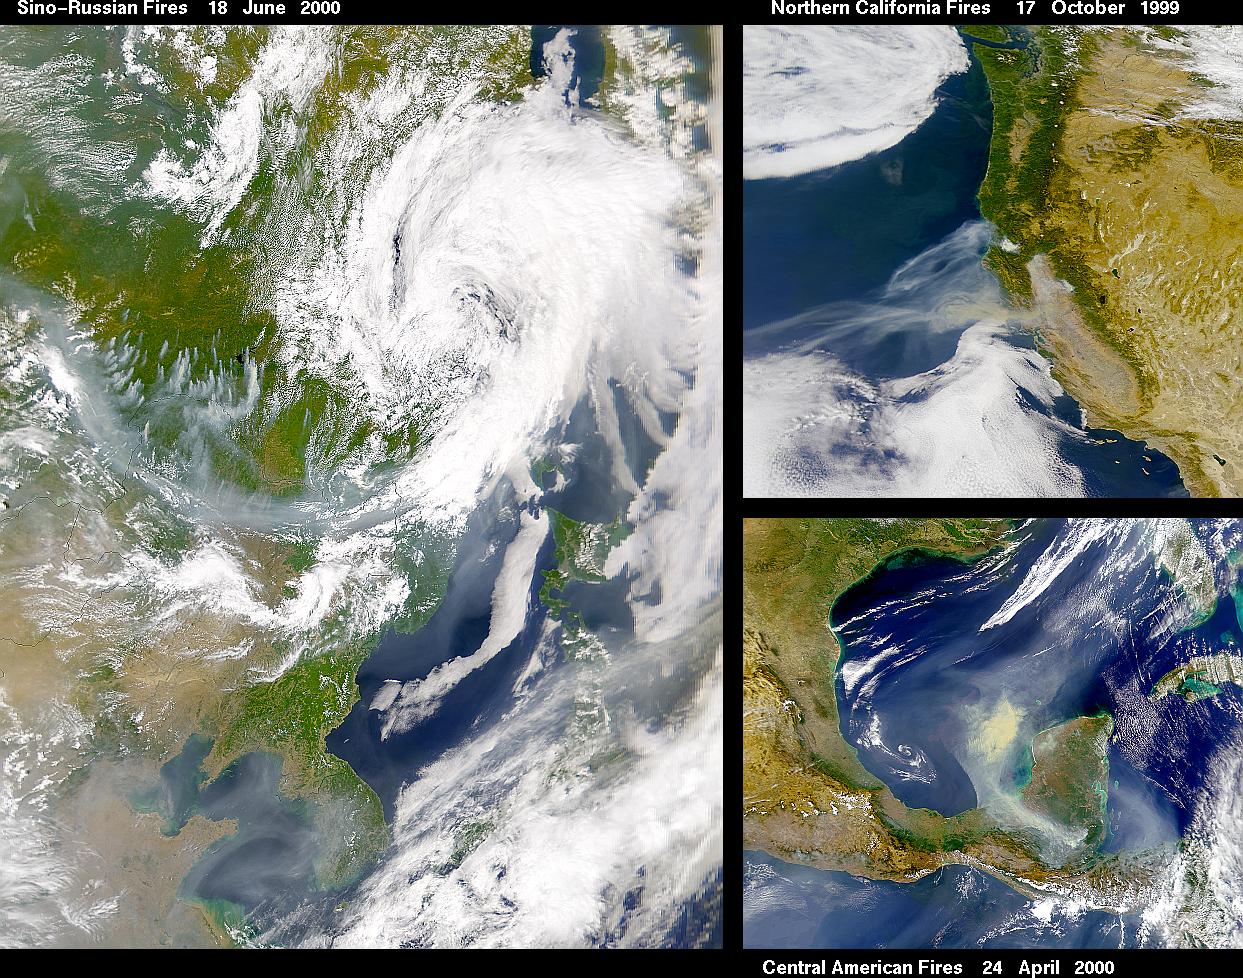 Images of smoke from forest fires in China, Russia, Central
 America, and California